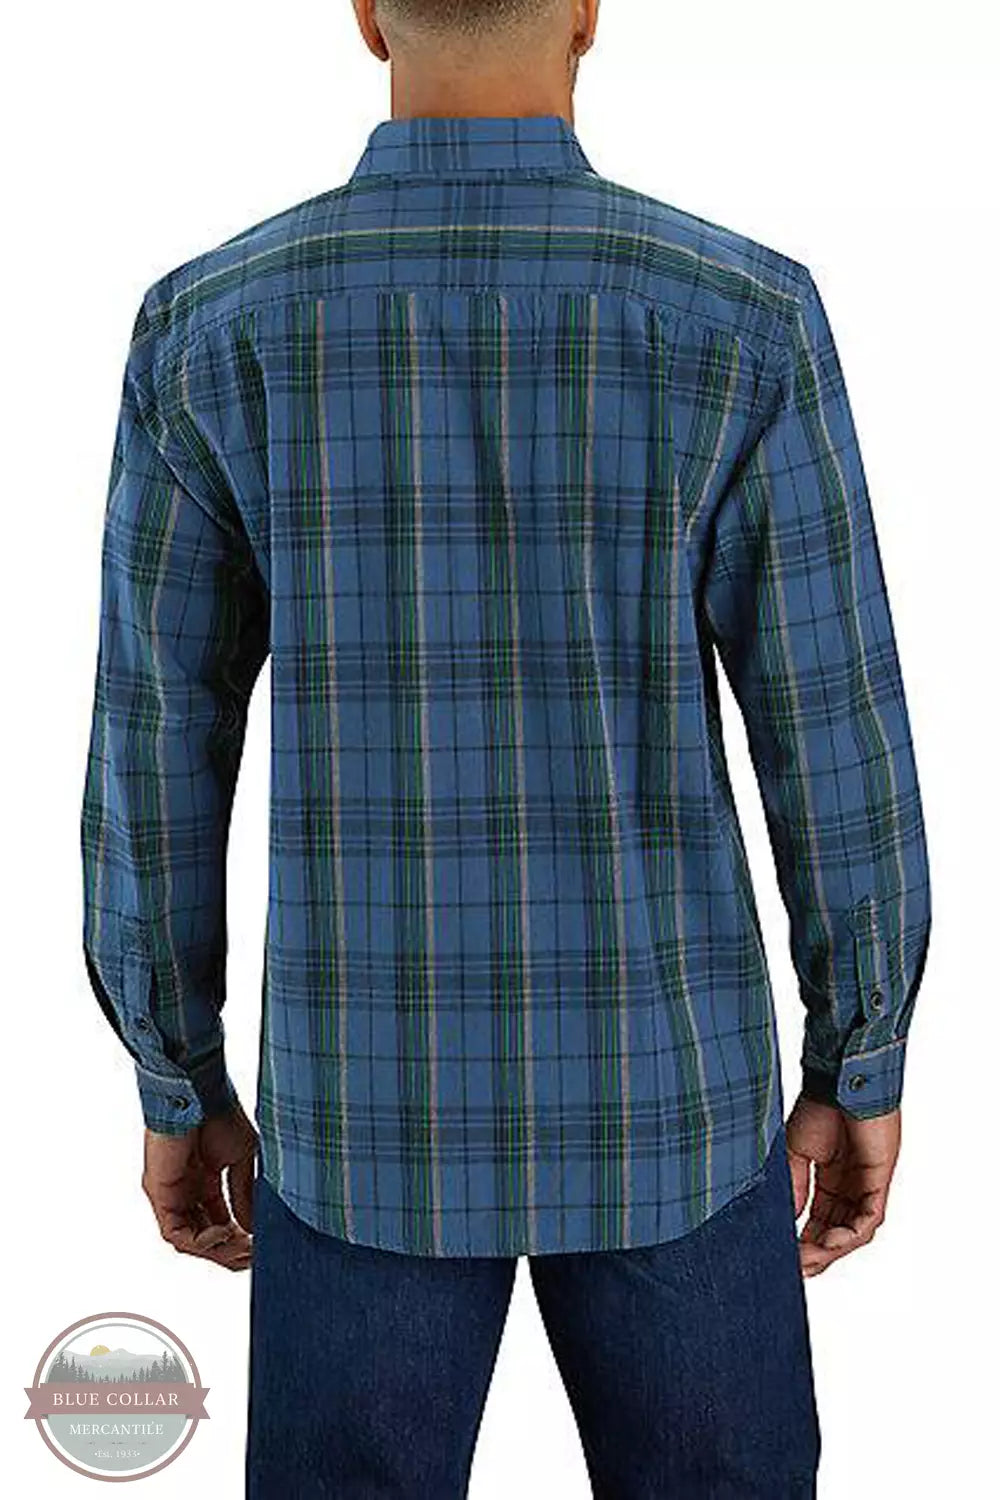 Carhartt 105946 Loose Fit Midweight Chambray Button Down Long Sleeve Shirt in Plaid Dark Blue Model Back View